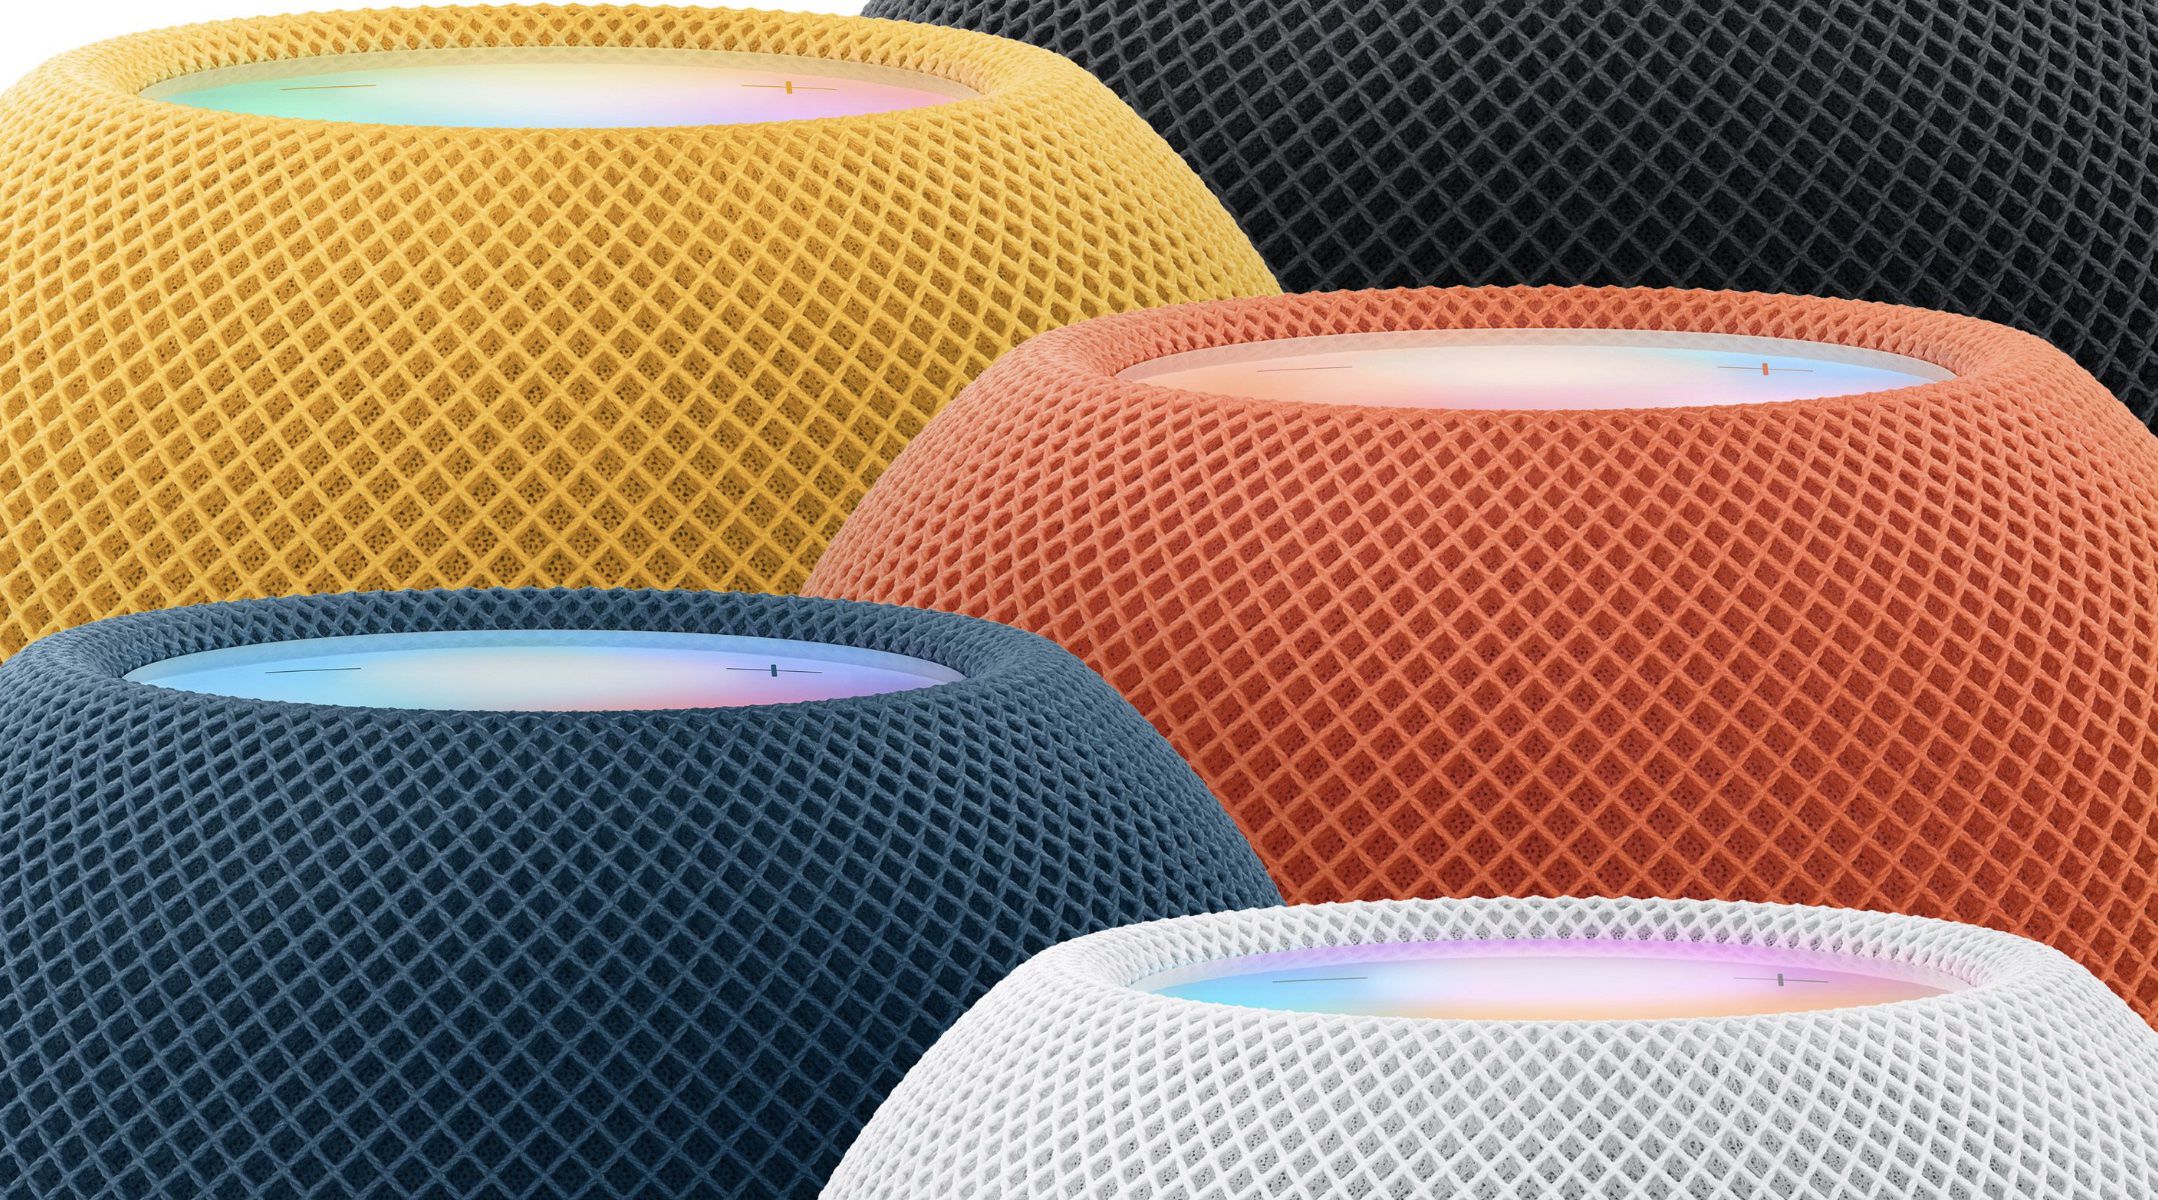 HomePod arrives February 9, available to order this Friday - Apple